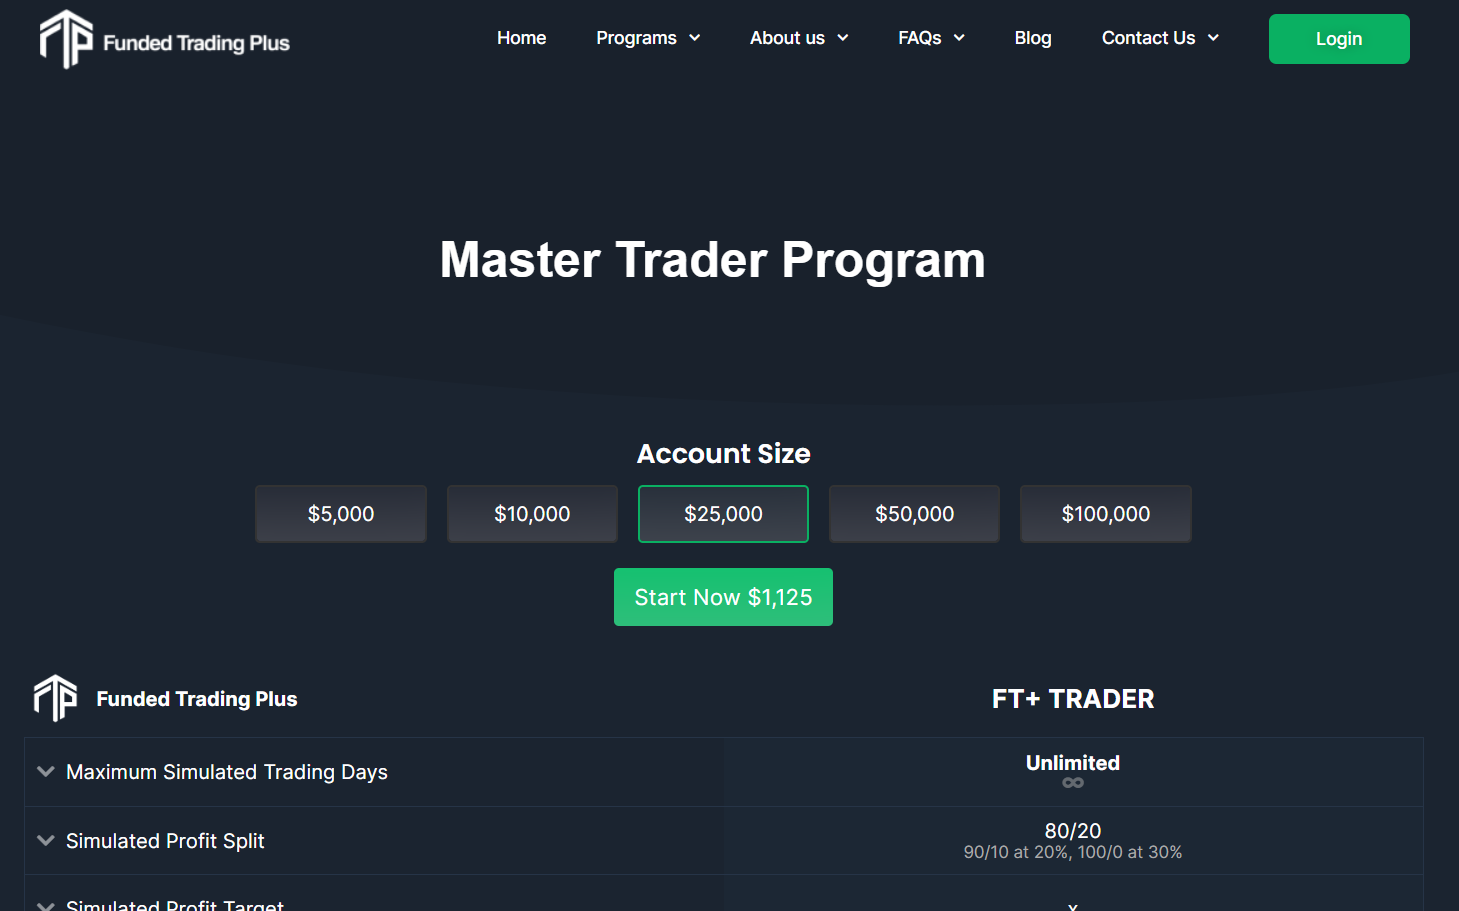 funded trading plus master trader program review (10% disc ount code: popa)